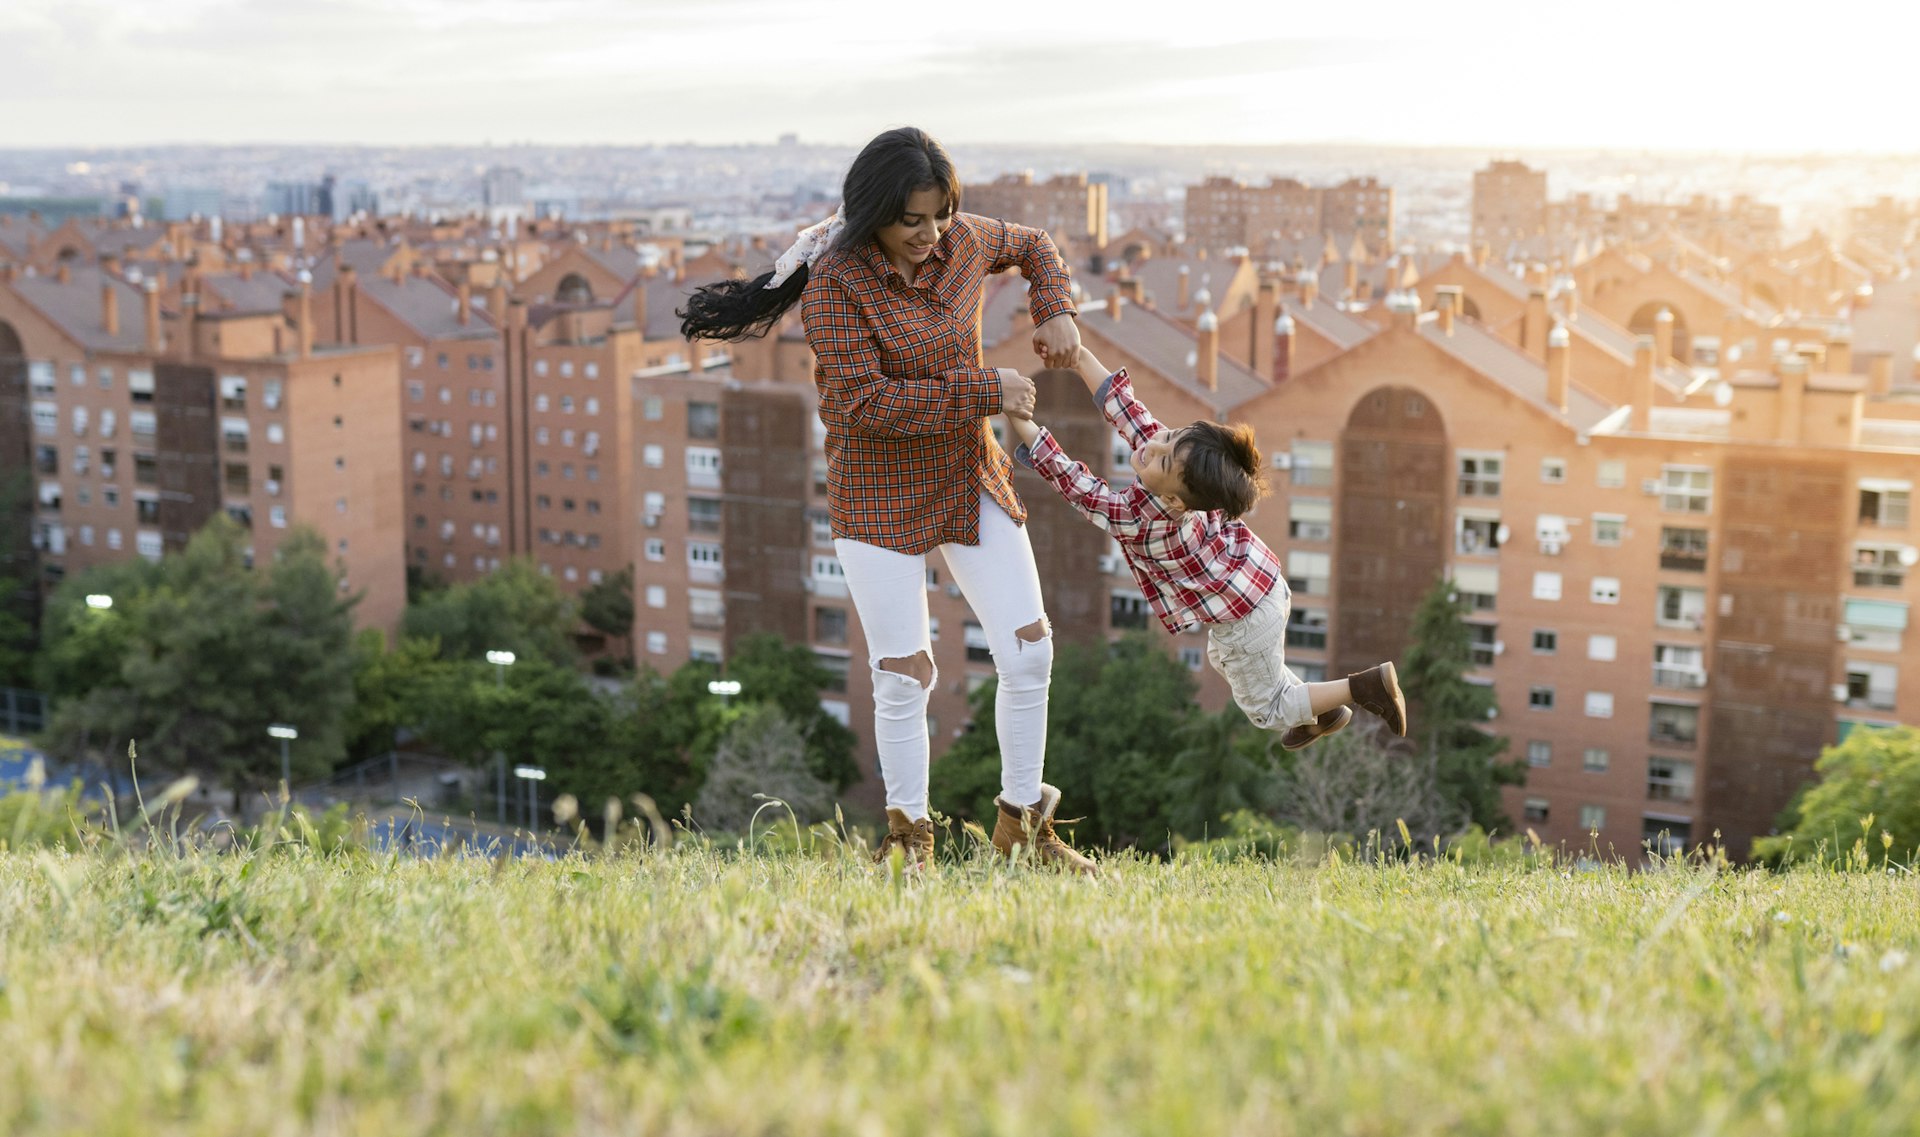 A mother swings her small boy around in an open space on a hill with a city in the background 